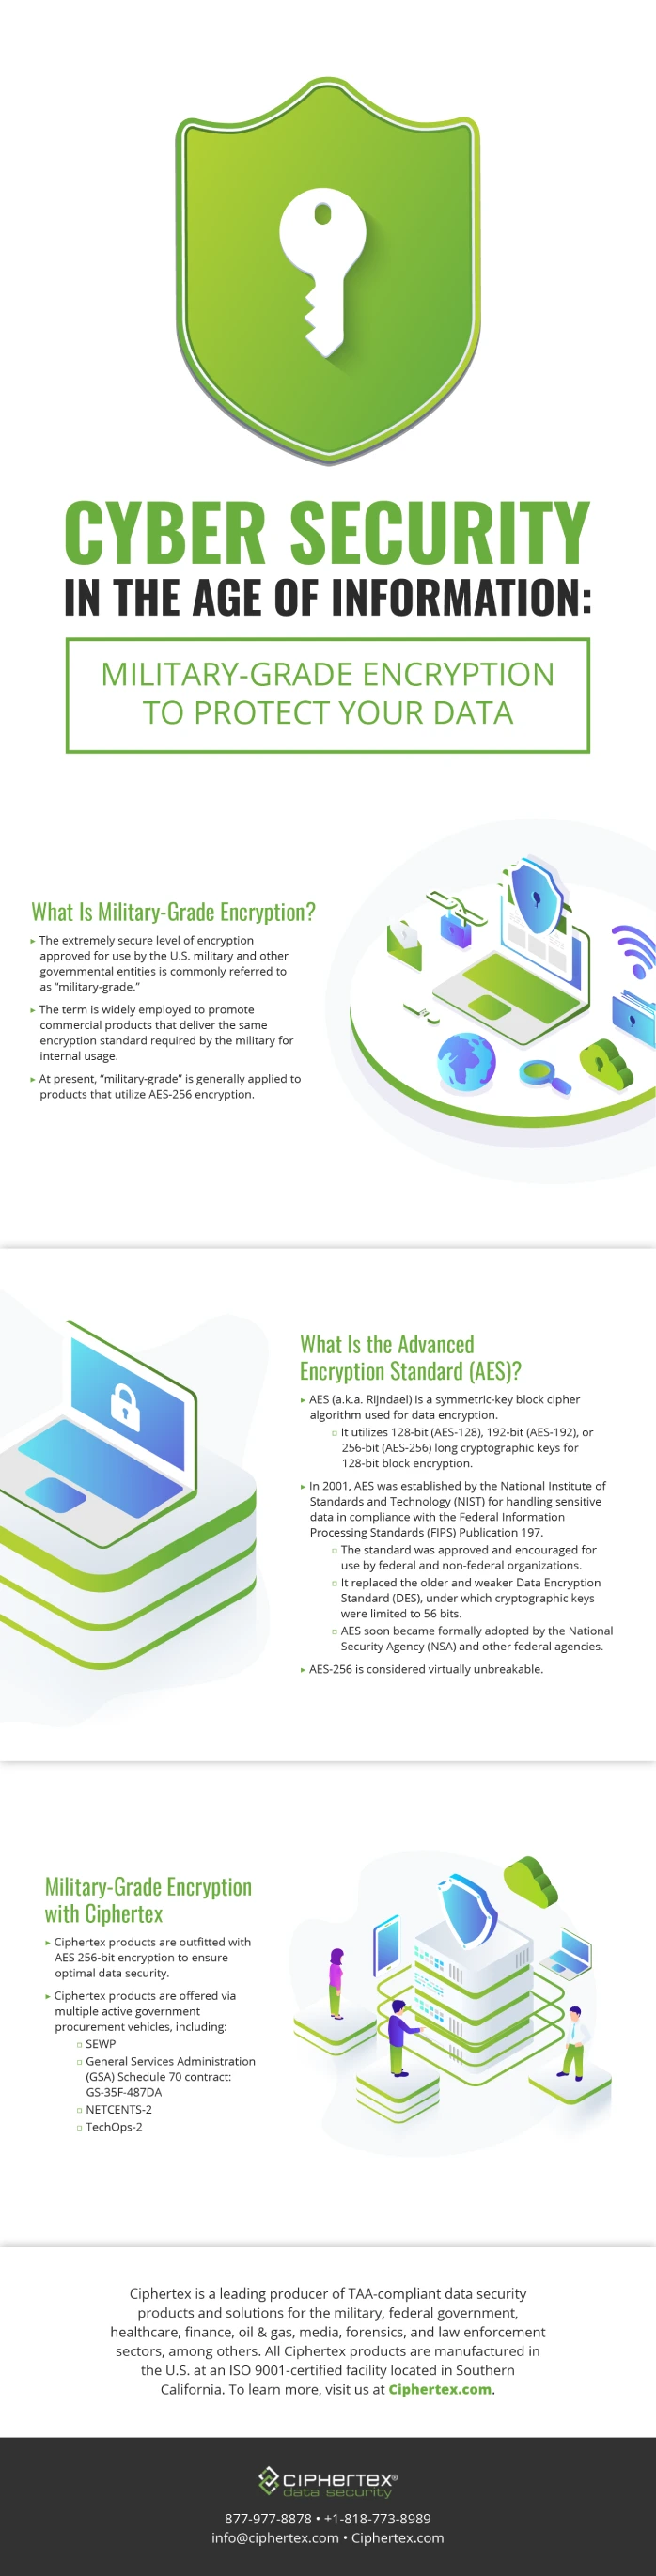 cyber-security-age-of-information-infographic-data-security-ciphertex-calif